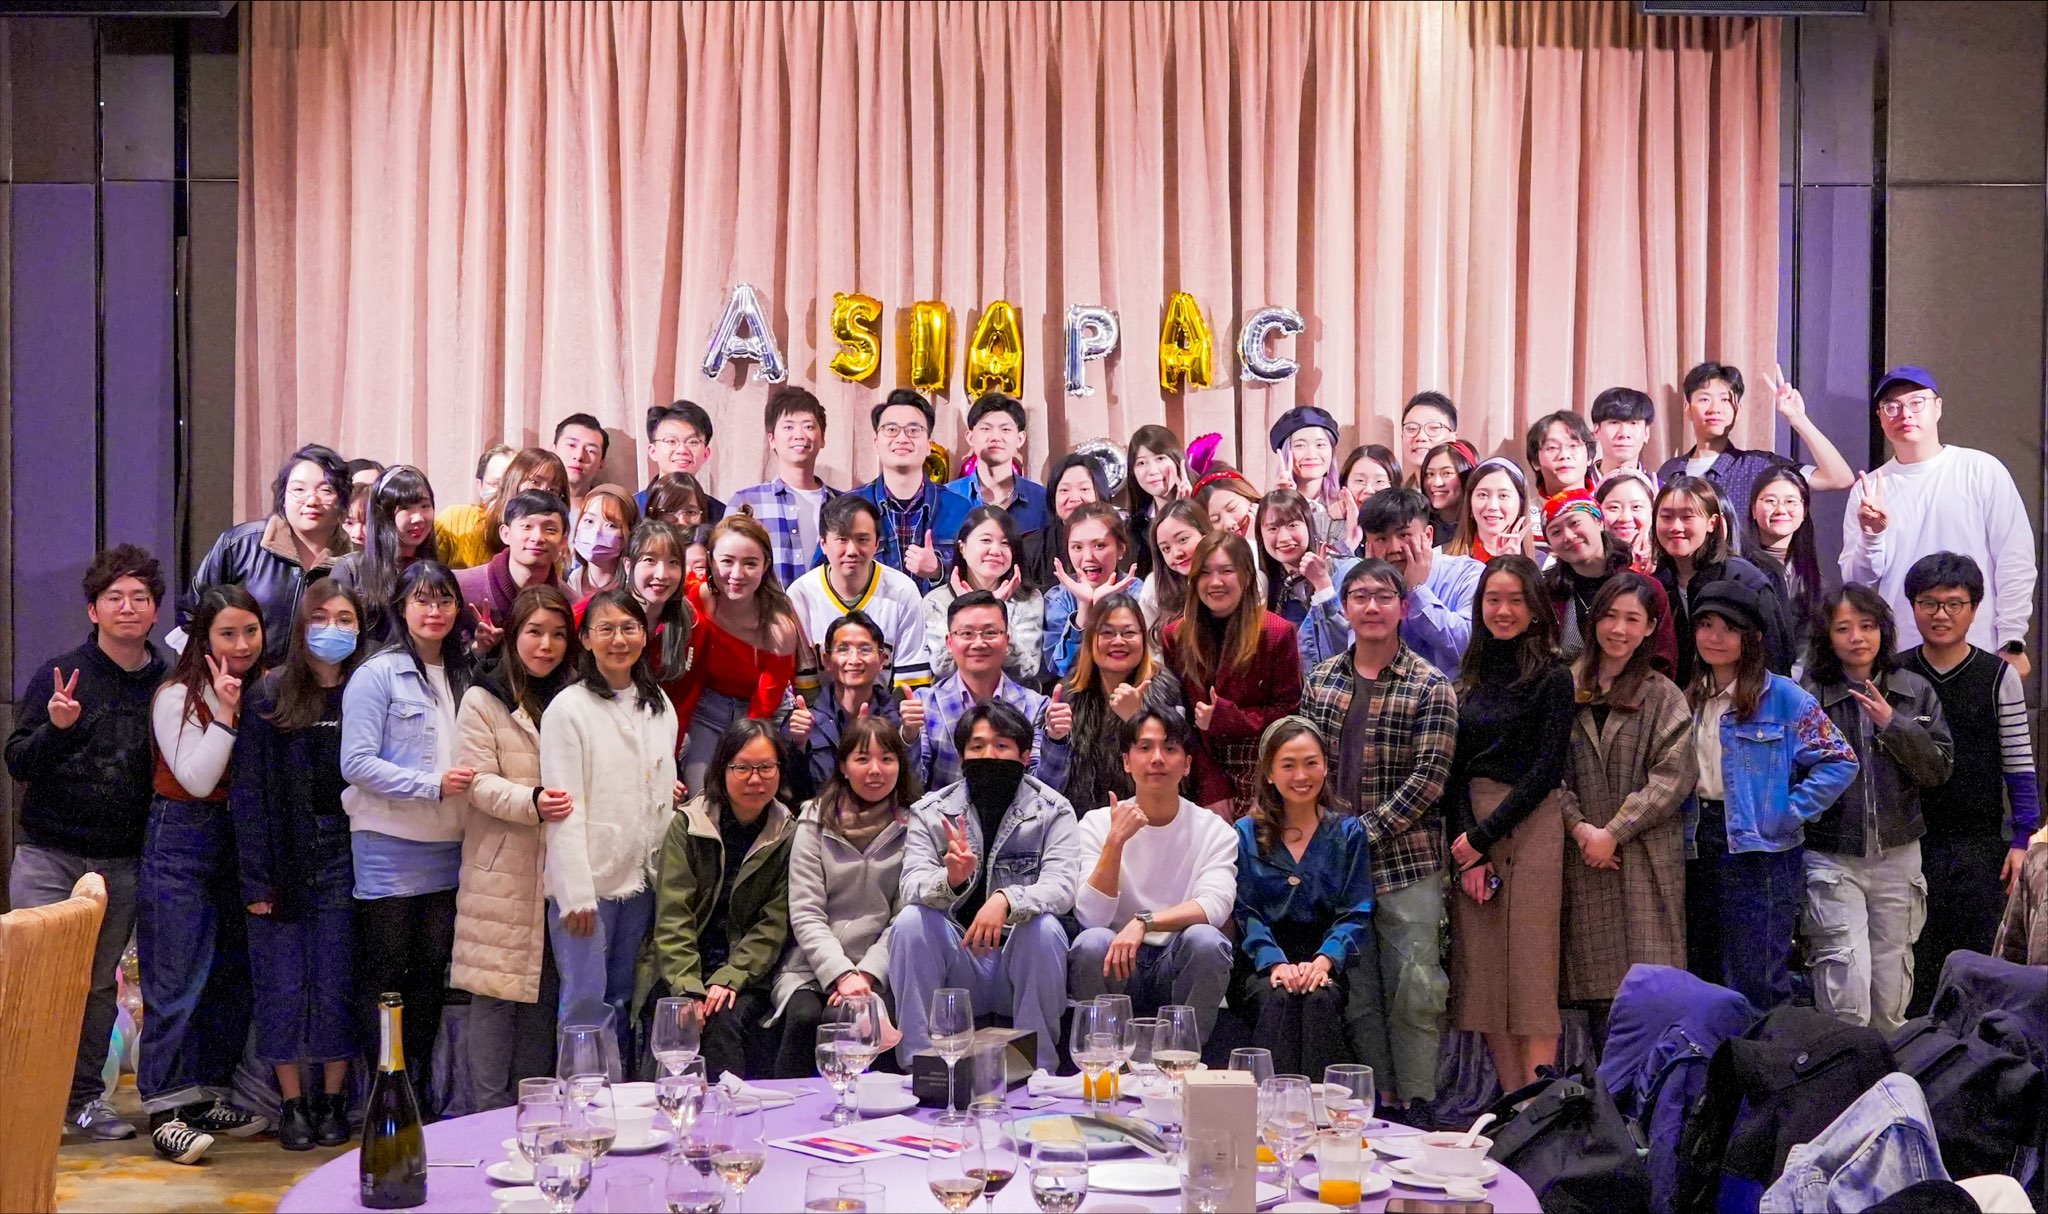 asiapac-annual-dinner-creating-another-year-of-success-01.jpg